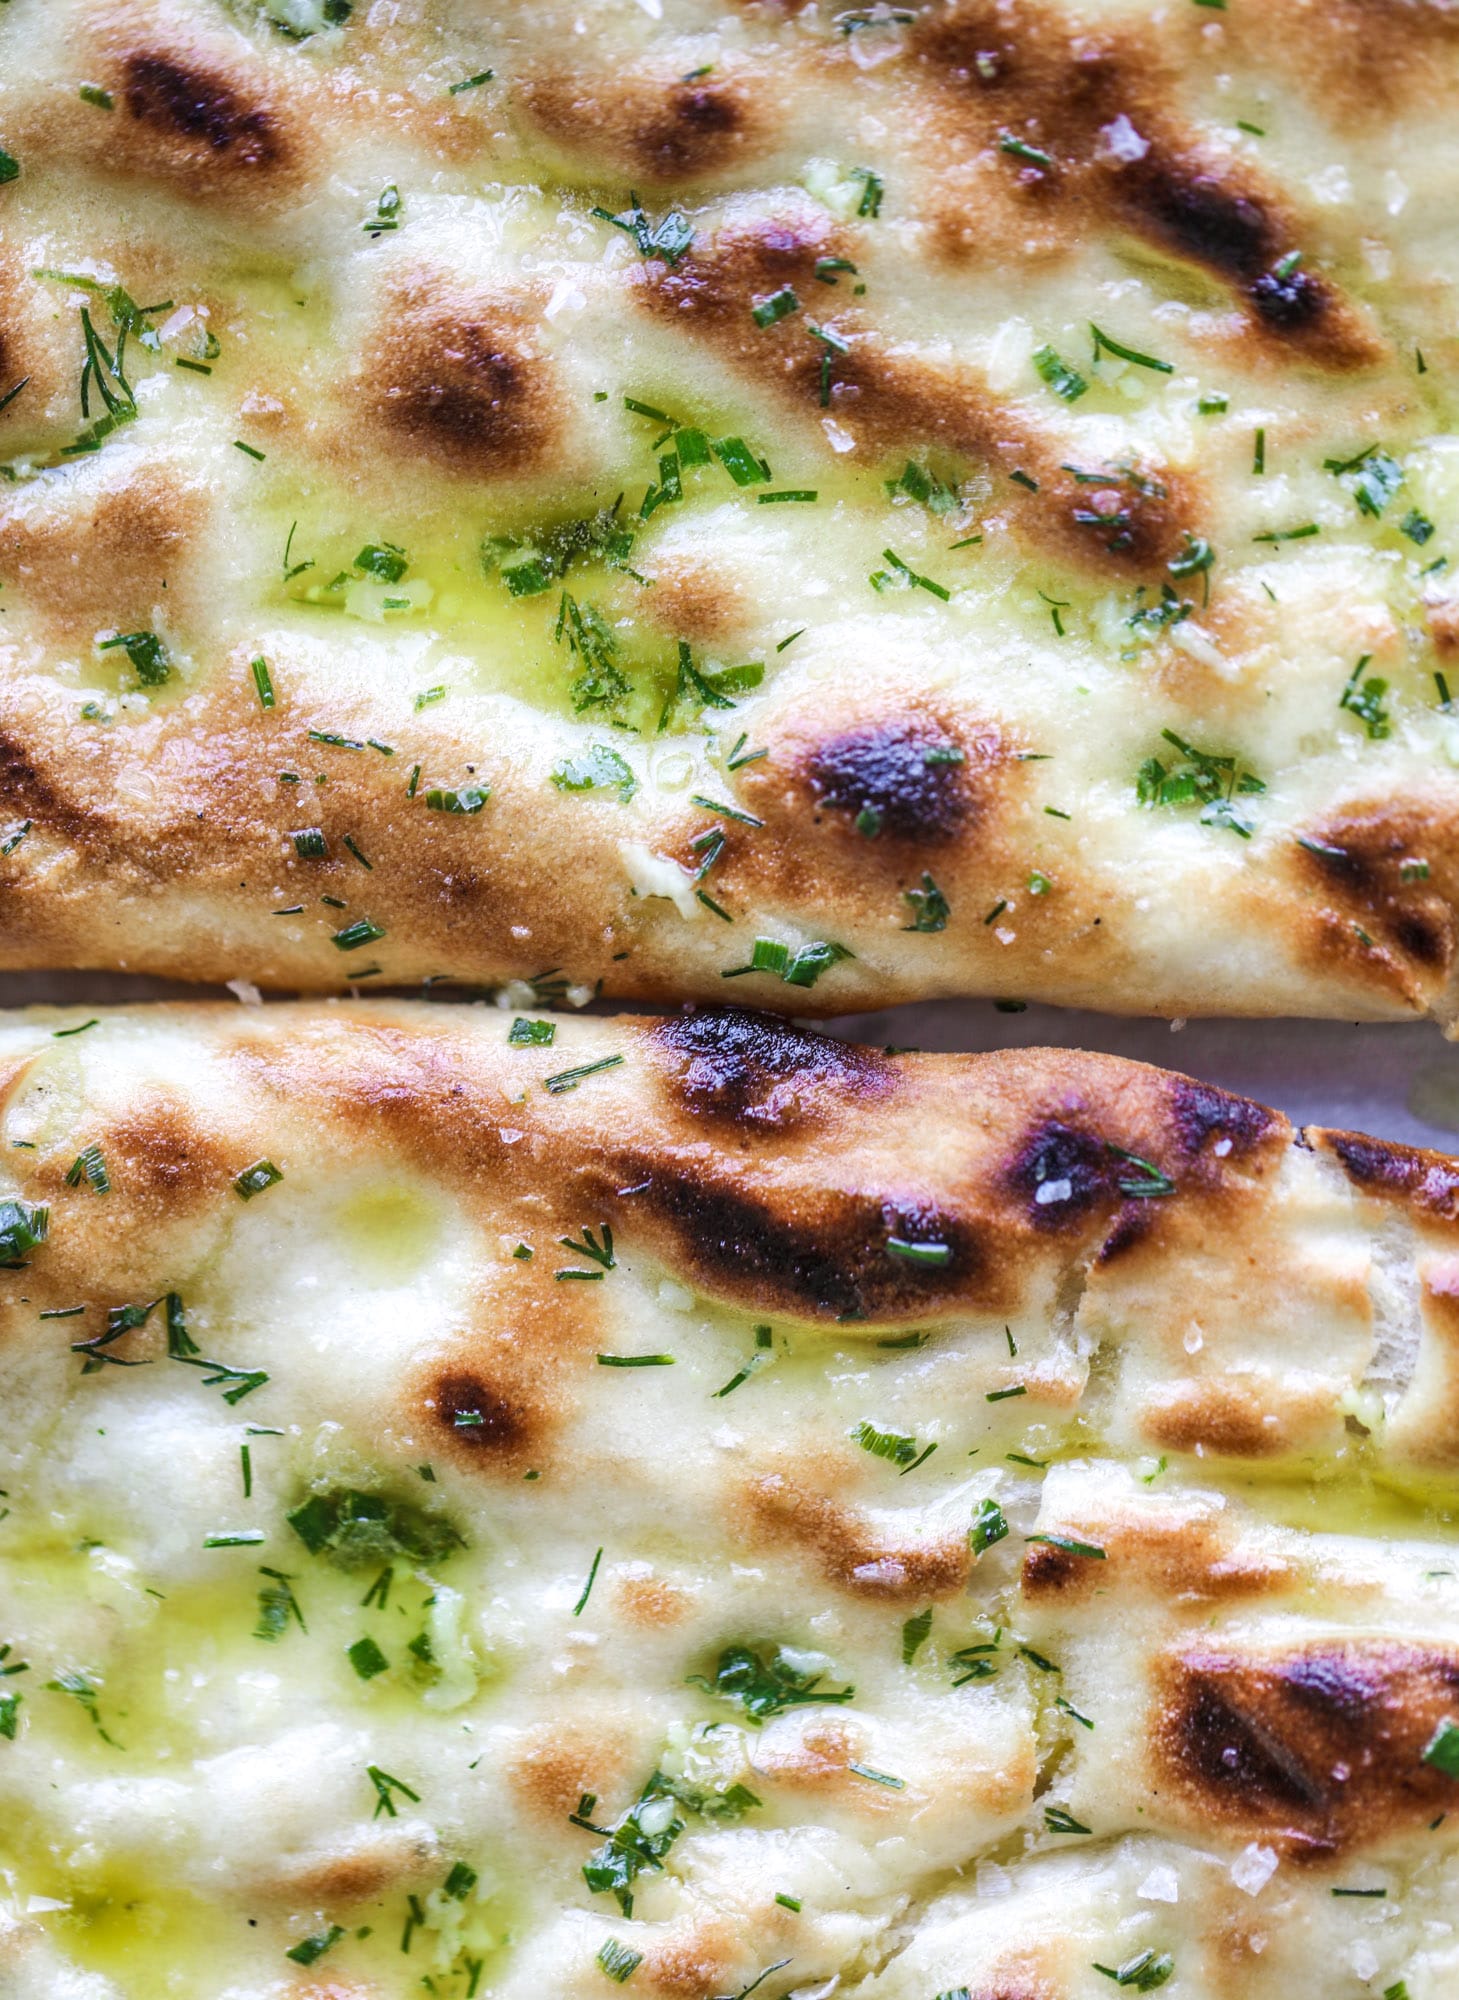 Grilled focaccia bread is such a treat! Topped with puddles of garlic butter, fresh chopped herbs and golden, caramelized onions, it's a slice of heaven.